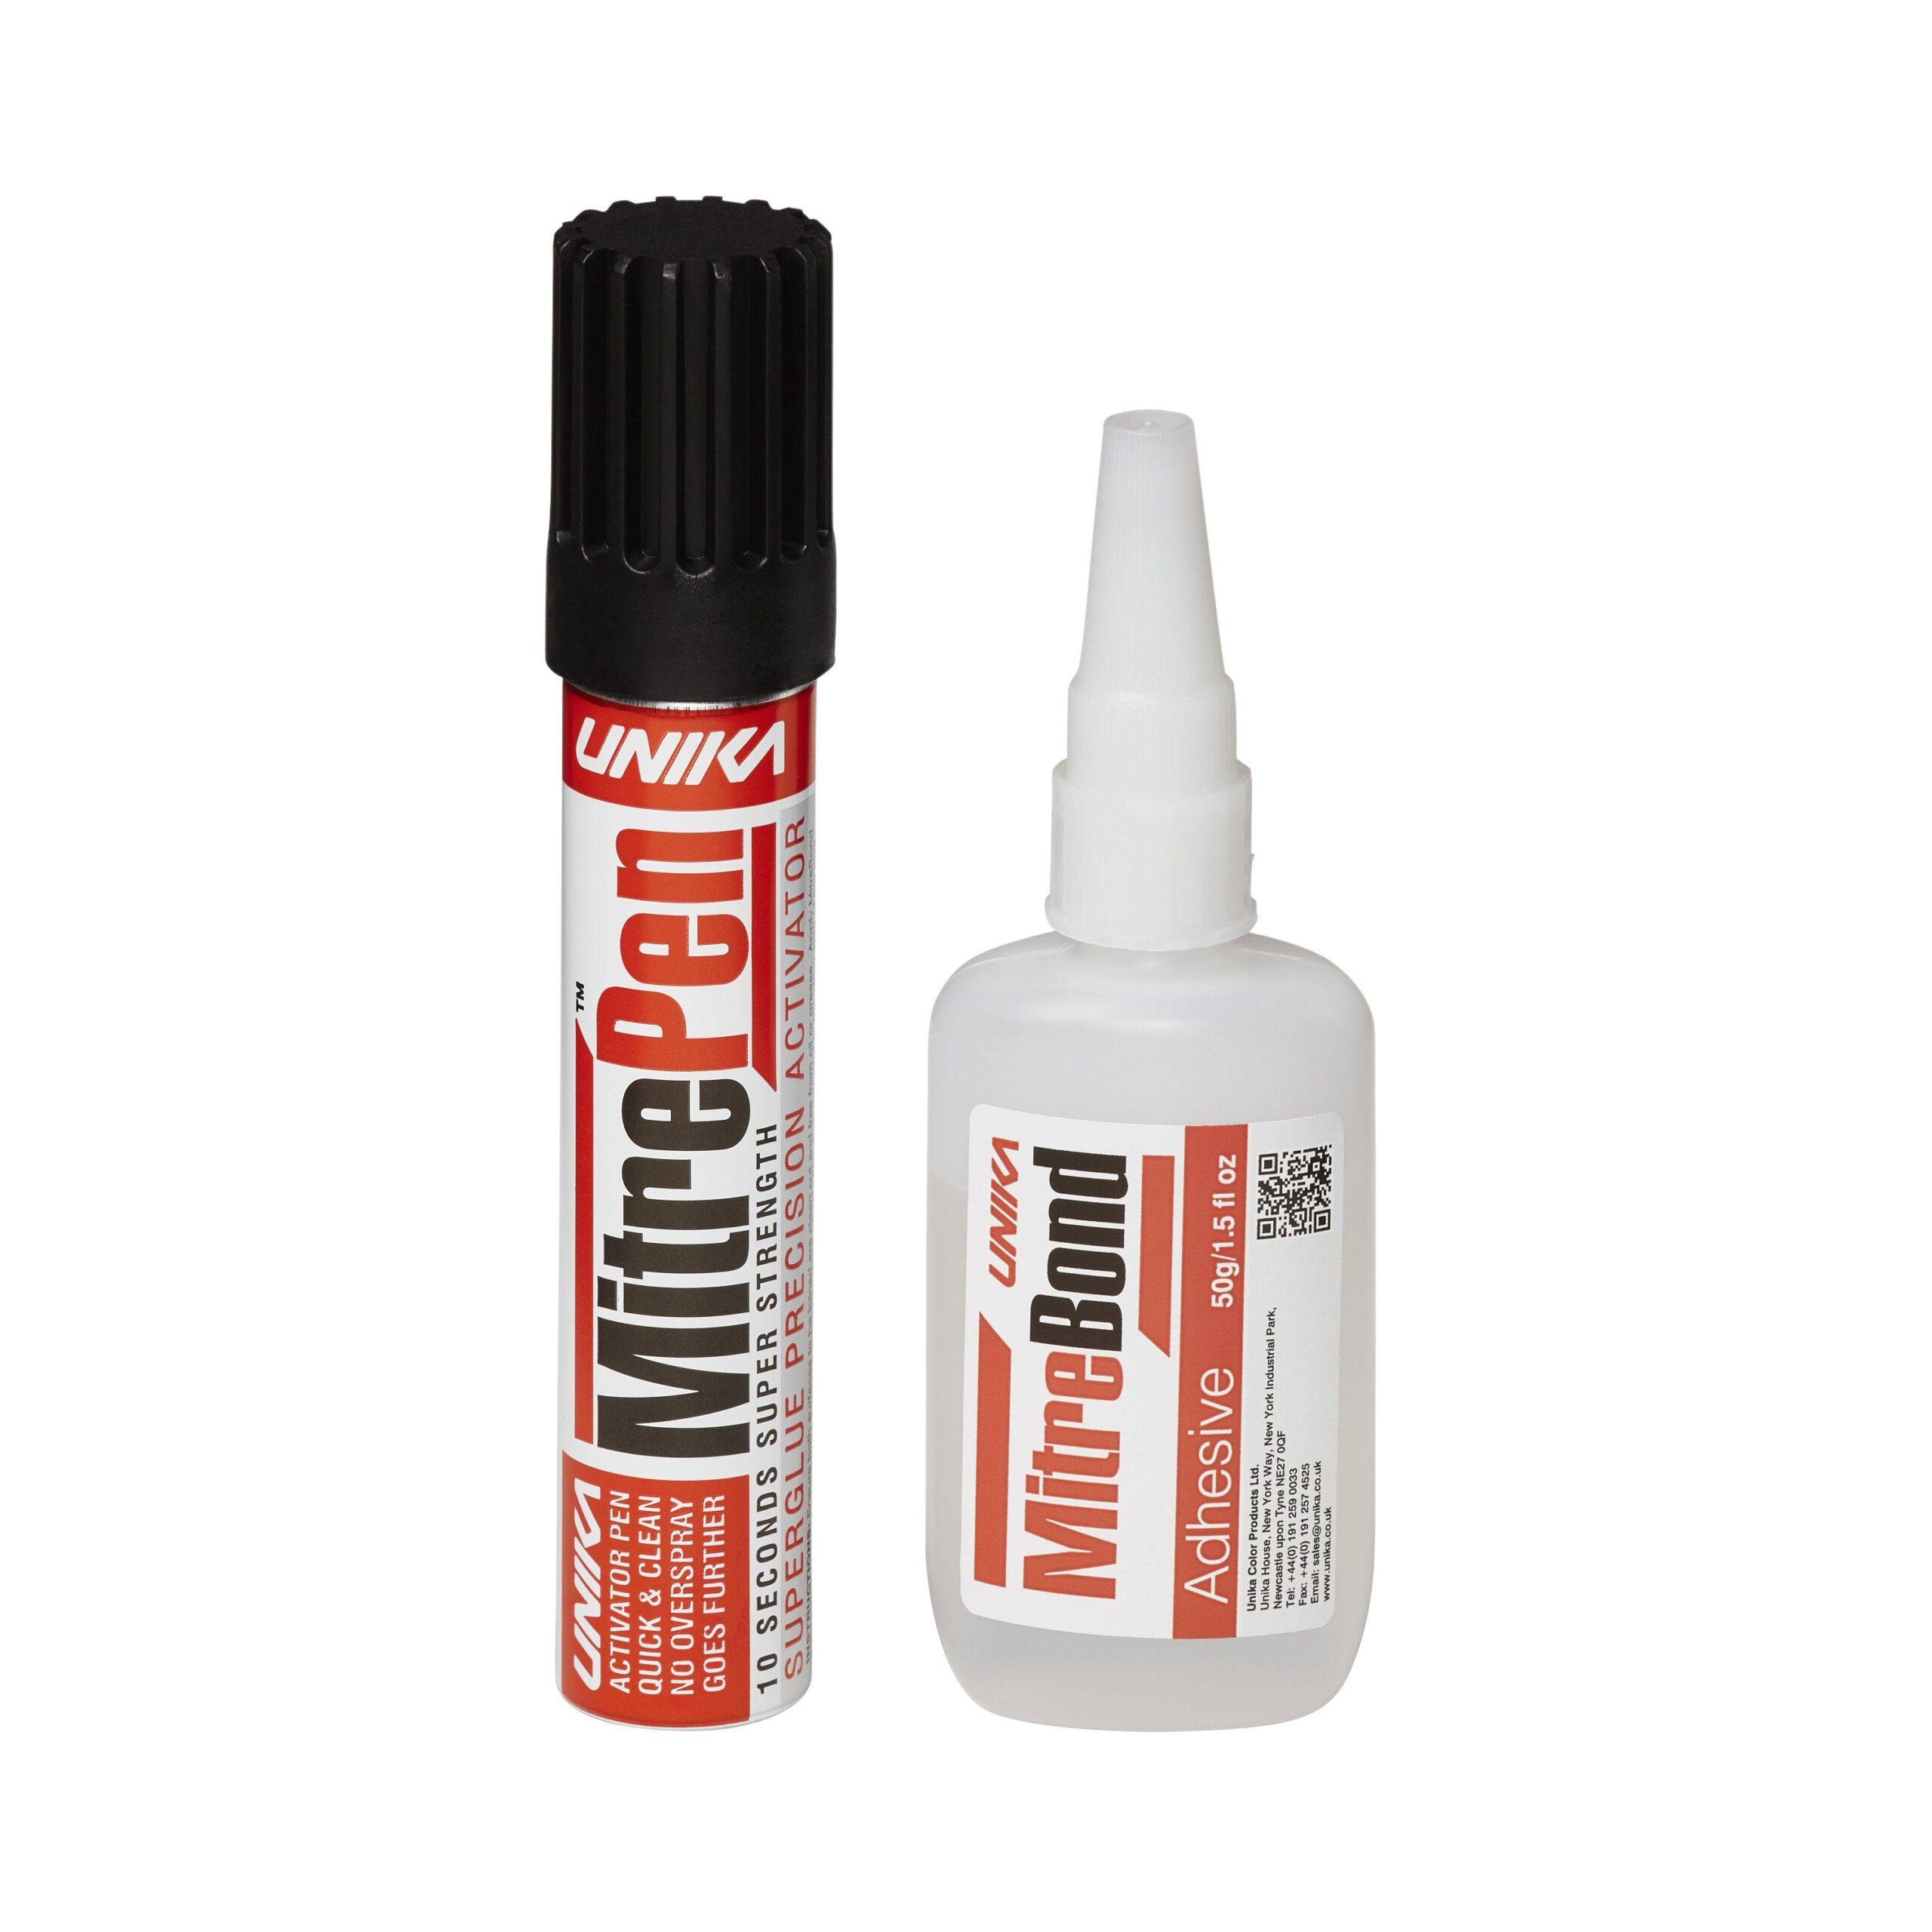 Glue For Ceramics And Porcelain Repair Strong Adhesive Jewelry Glue  Mounting Adhesive Strong Glue For Wood Ceramic Metal Instant